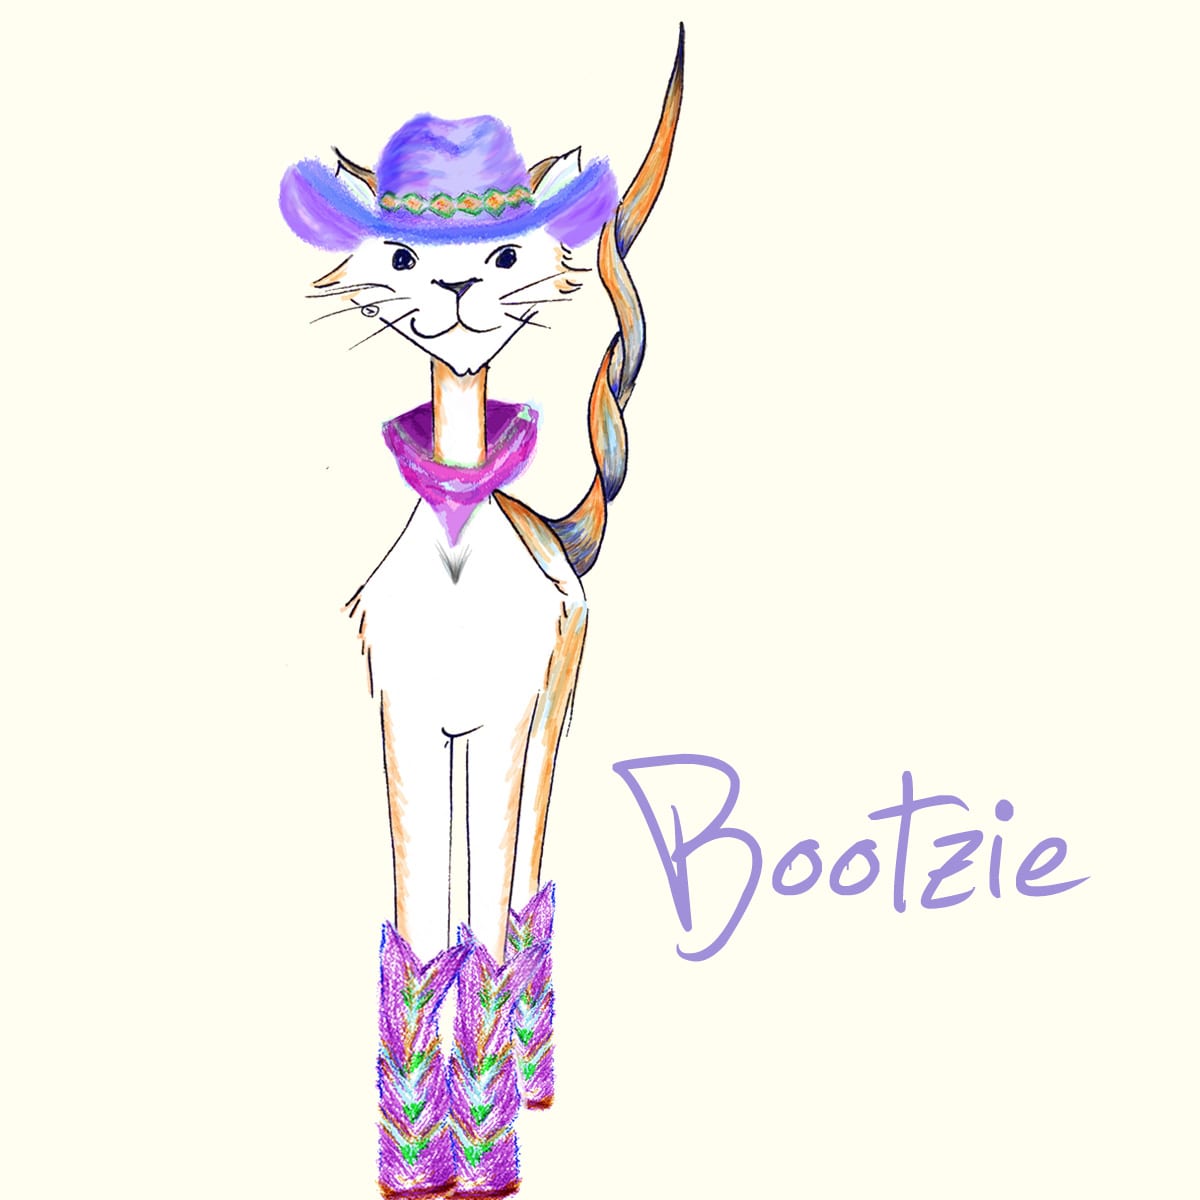 Bootzie